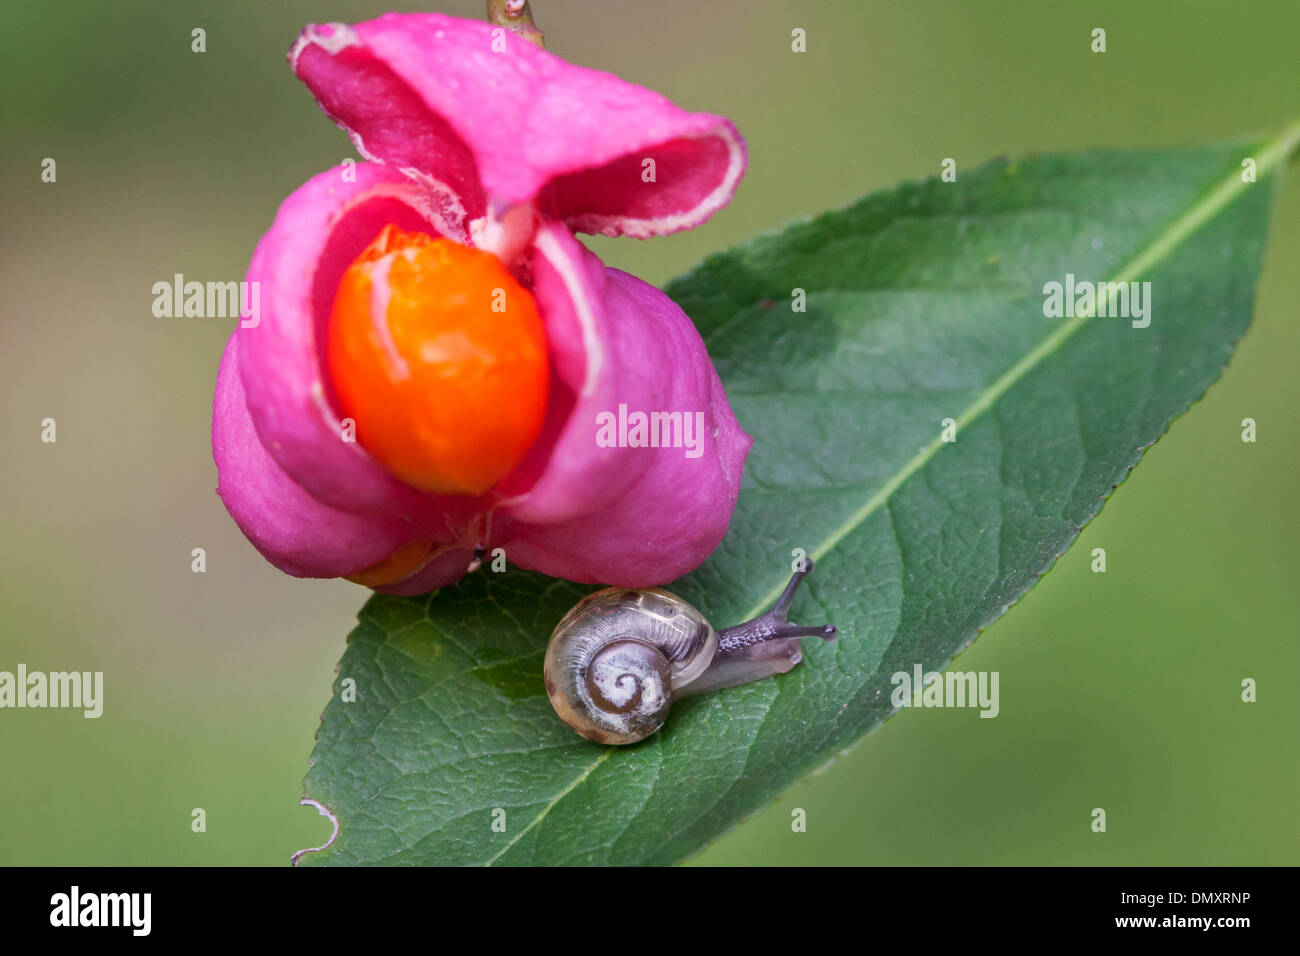 Little snail and European spindle / common spindle (Euonymus europaeus) close-up of ripe fruit showing bright orange seeds Stock Photo